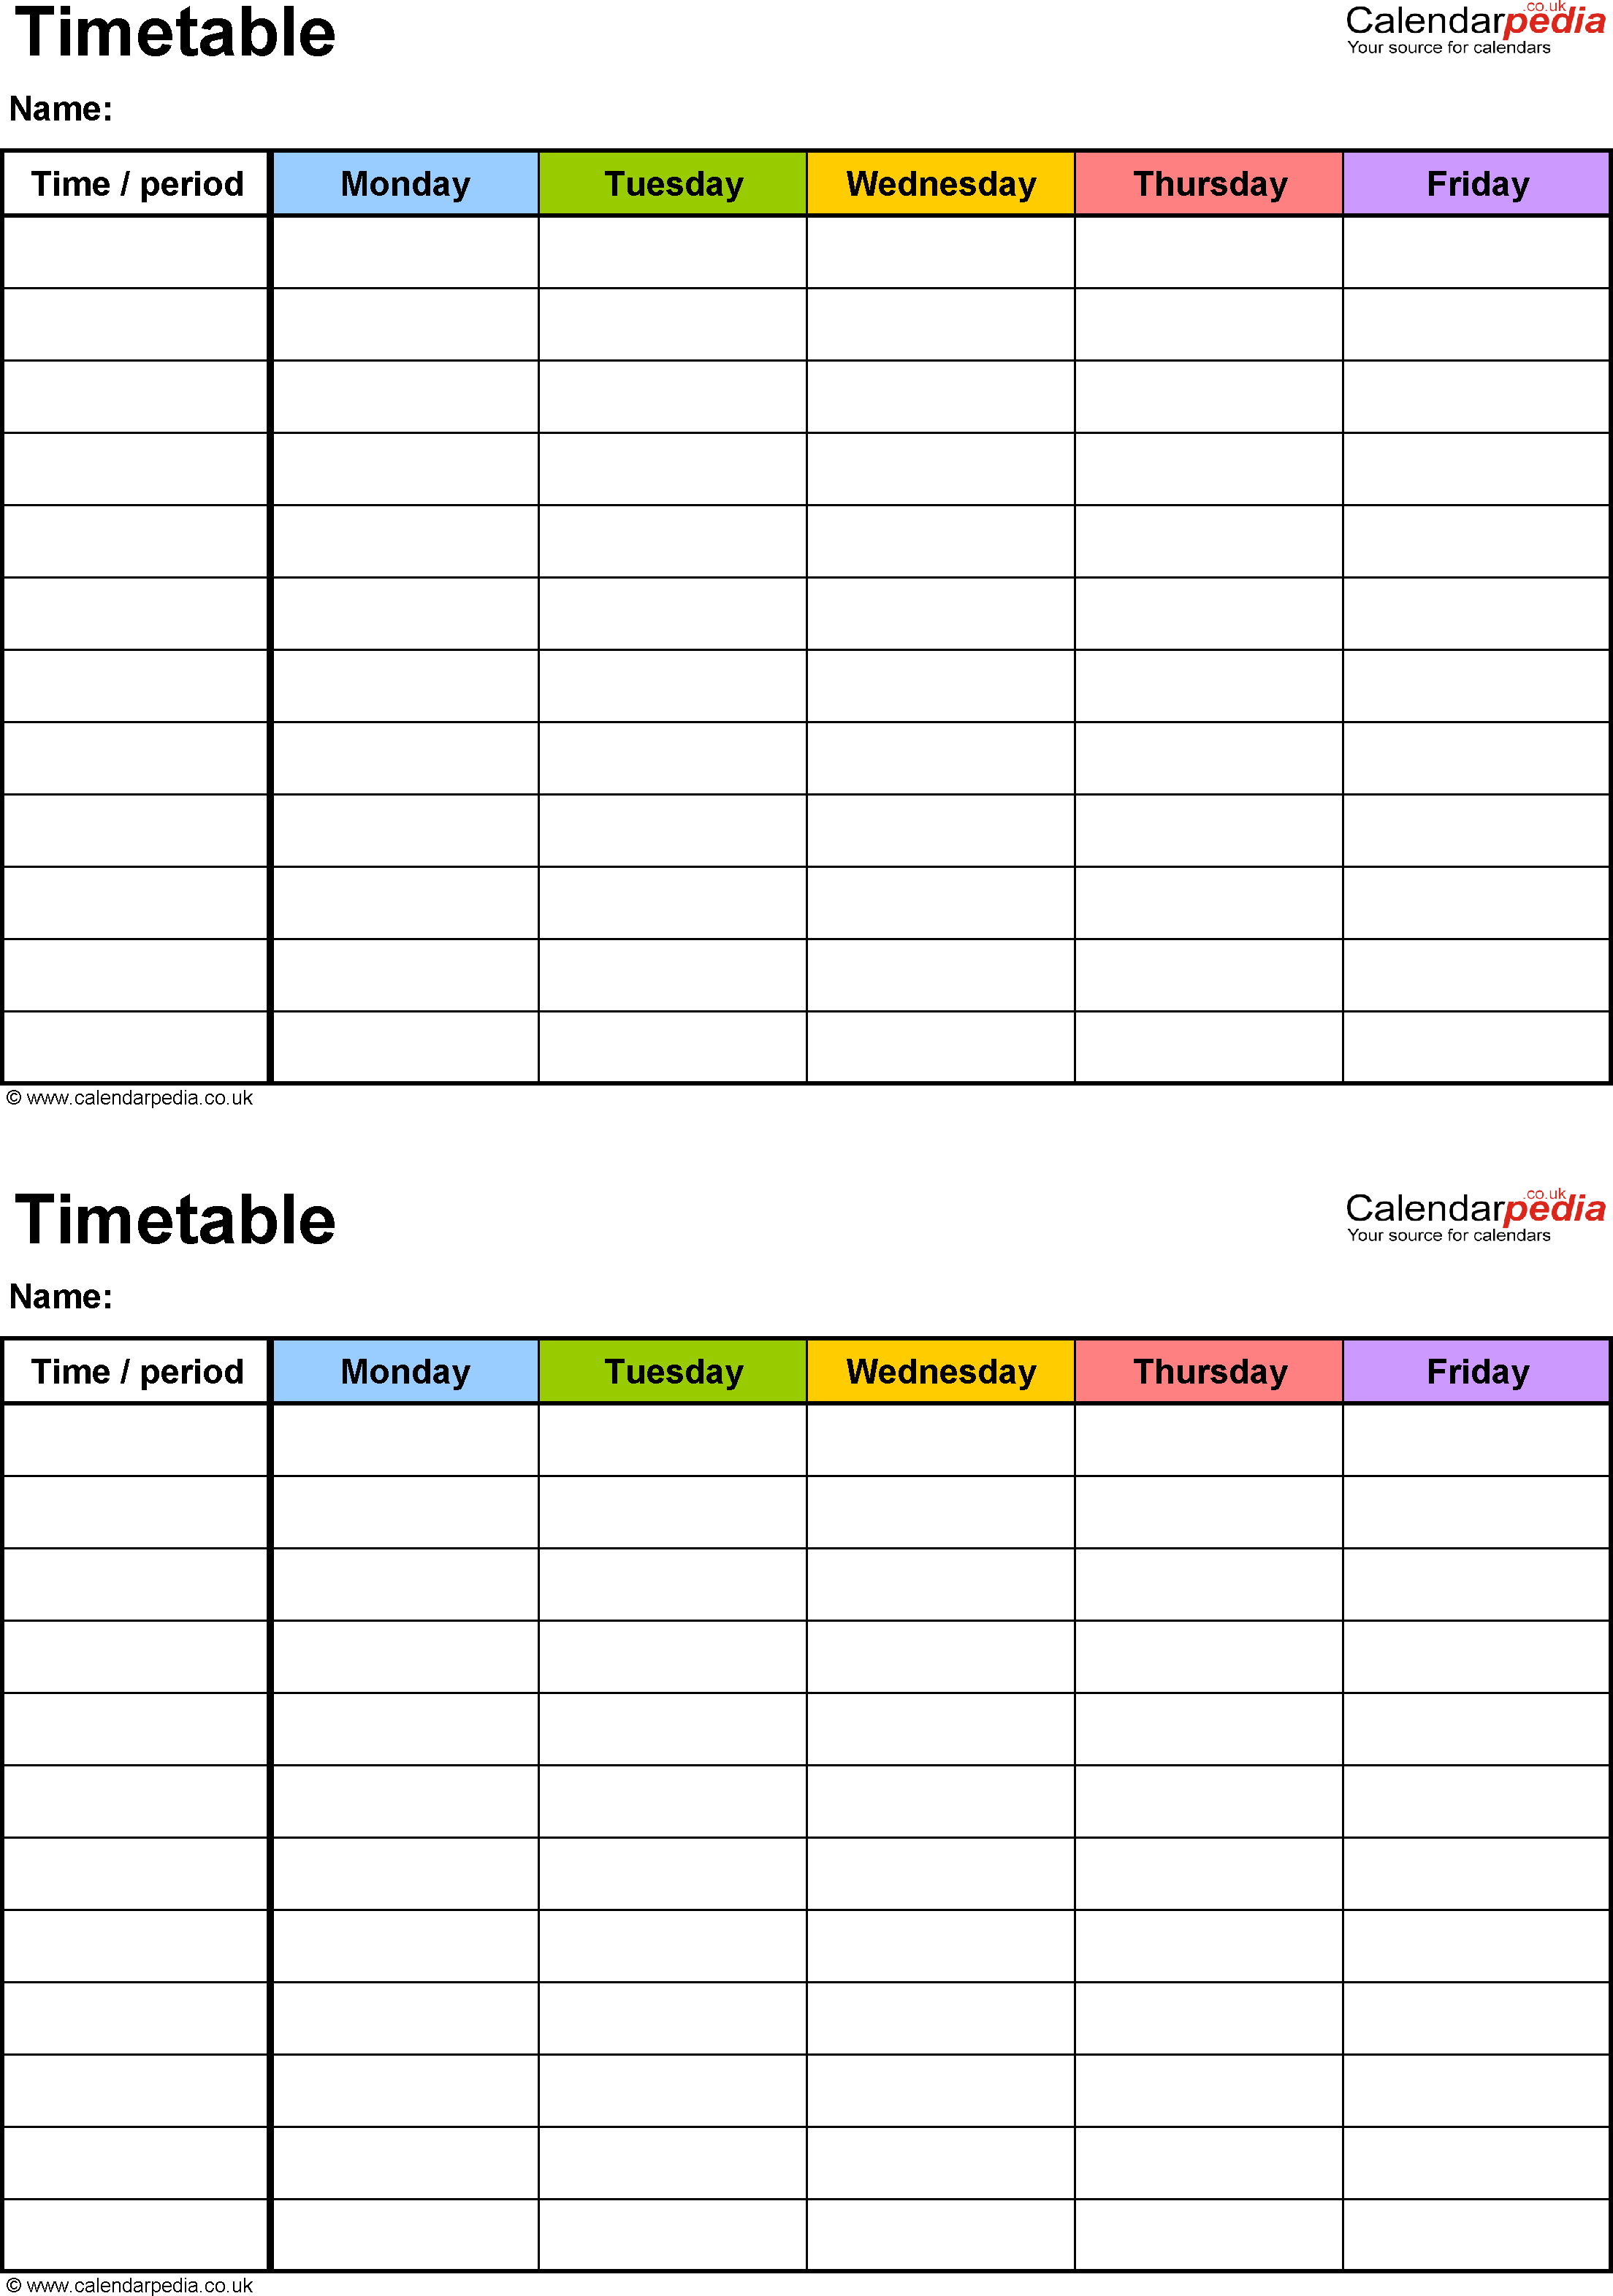 Excel Timetable Template 6: 2 A5 Timetables On One Page throughout Printable Two Week Calendar Template